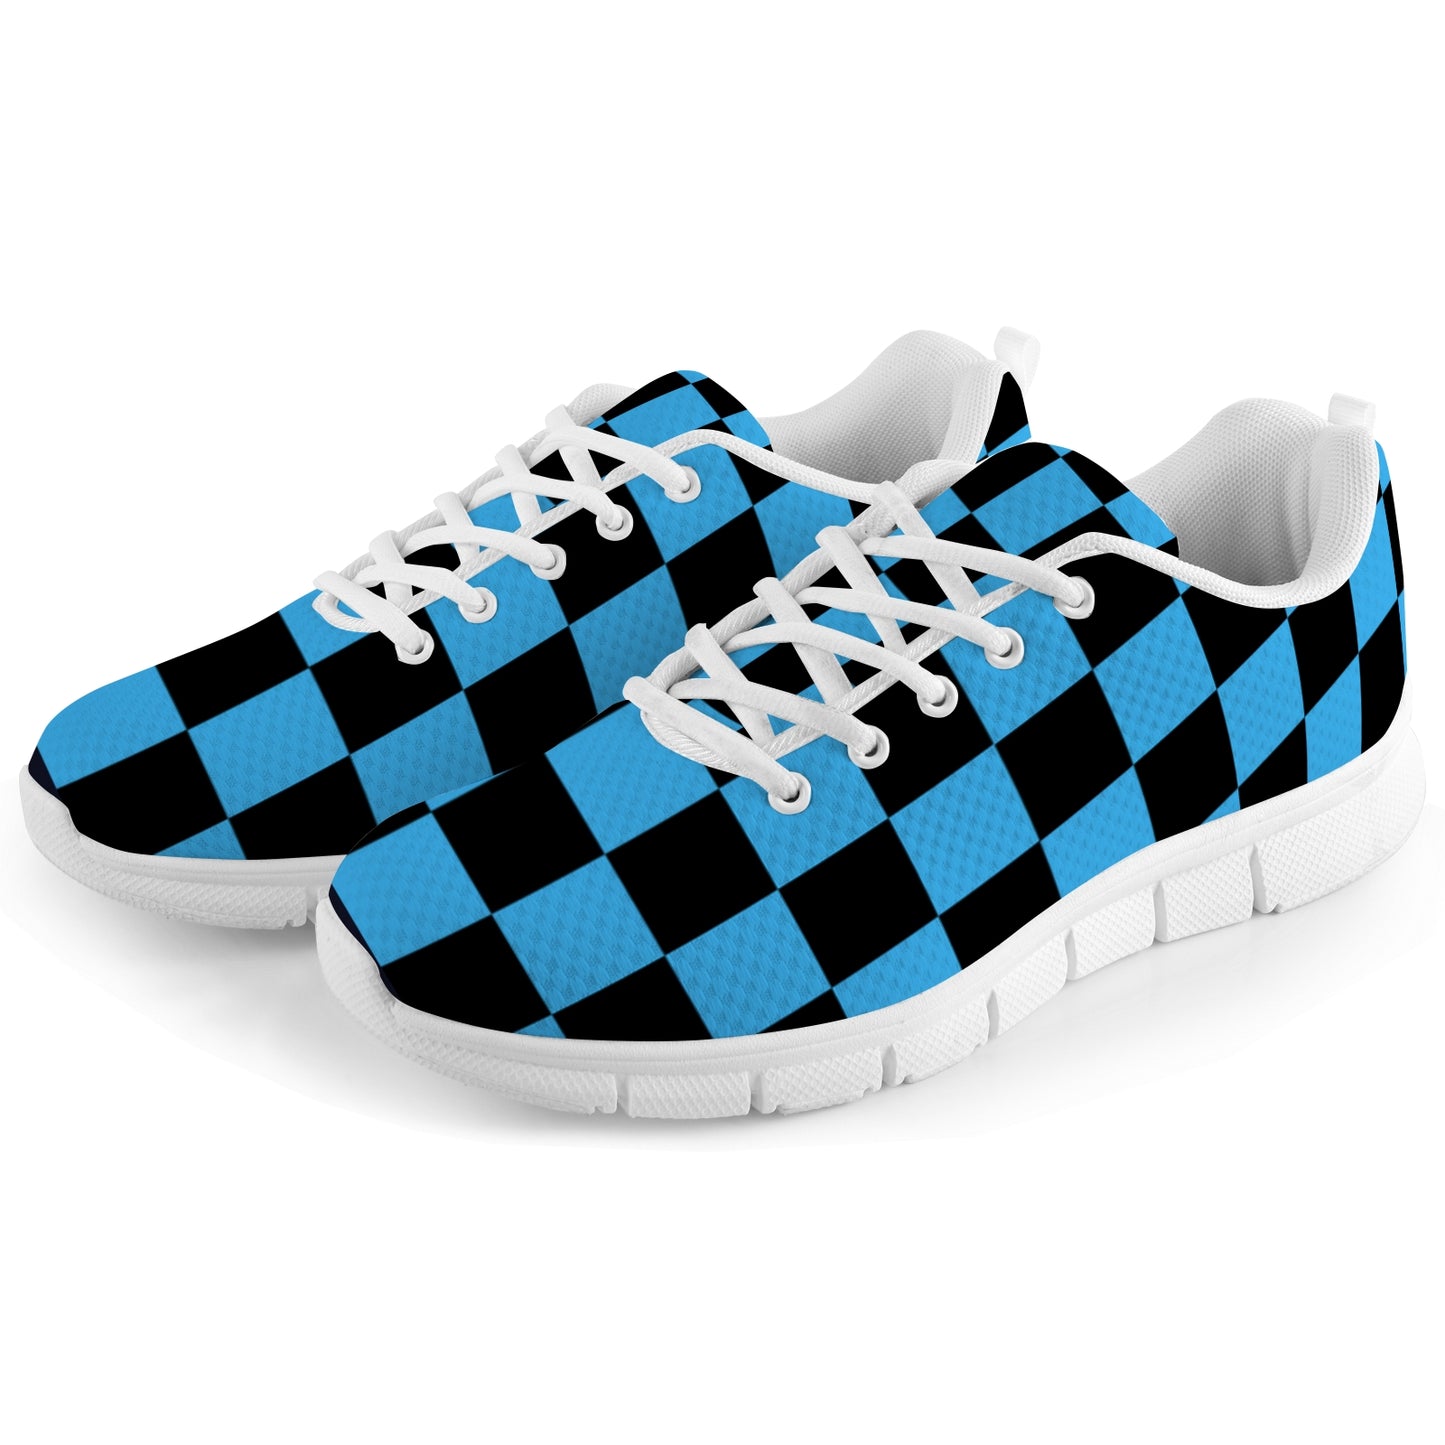 Men's Breathable Sneakers - Blue/Black Checkers